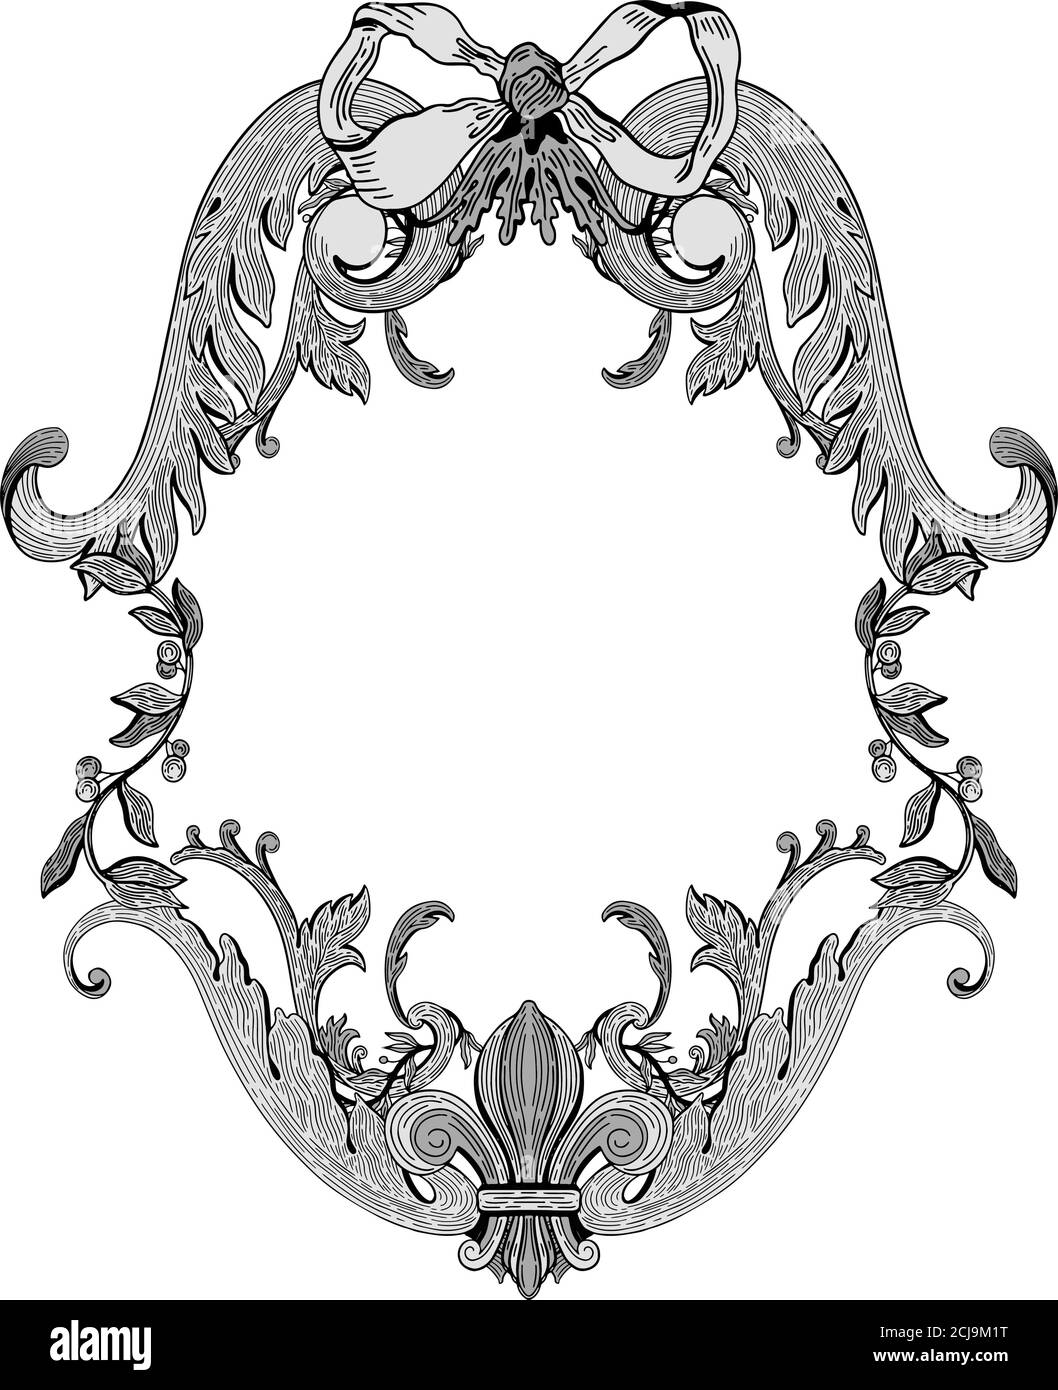 Frame ornamental decorative baroque elegant. Suitable for wedding invitations, postcards and other projects. Stock Vector